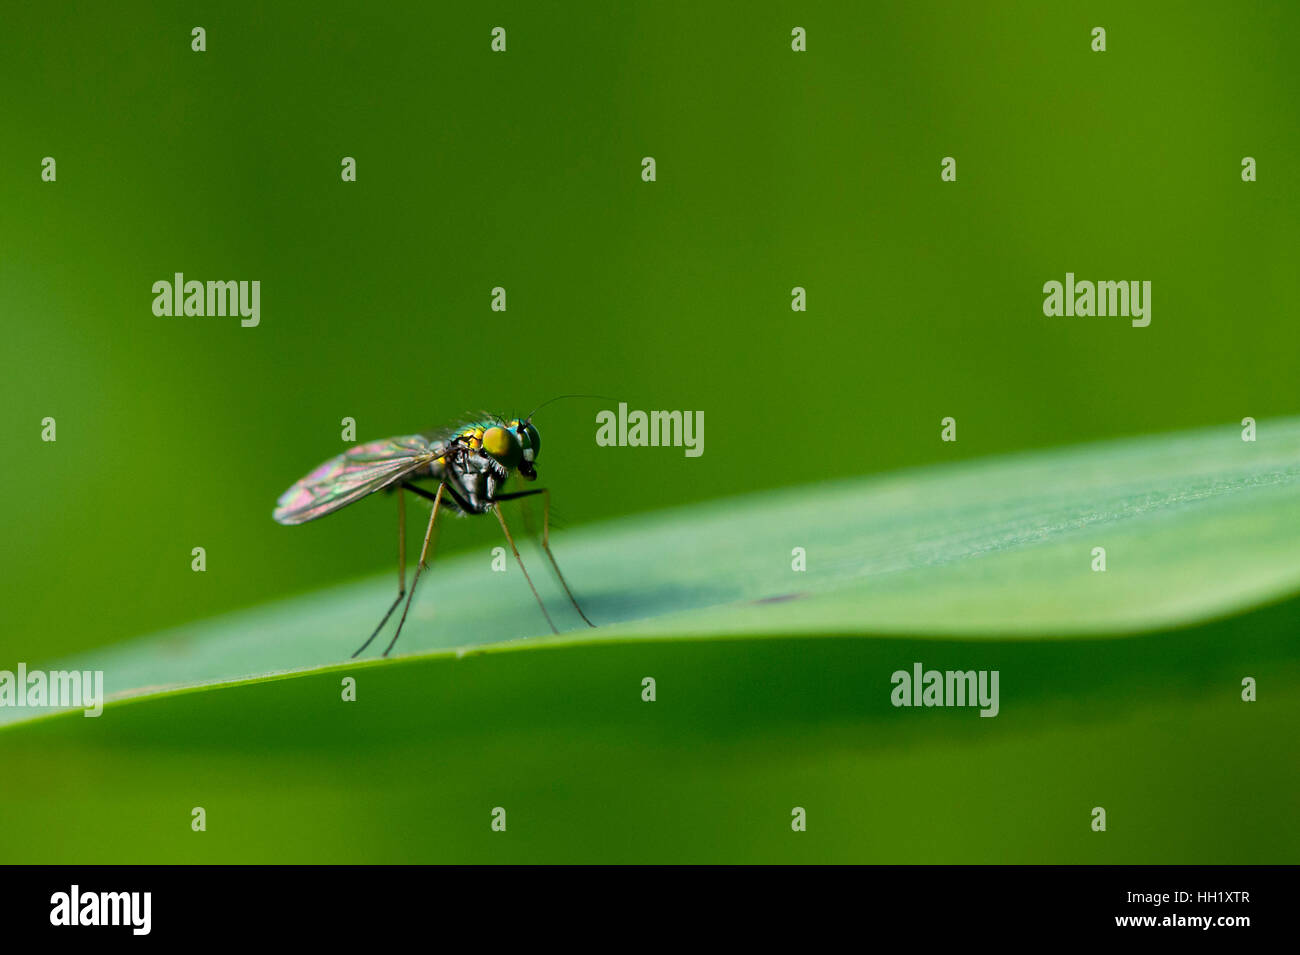 A Long Legged Fly stands on a large blade of grass with a bright green background. Stock Photo